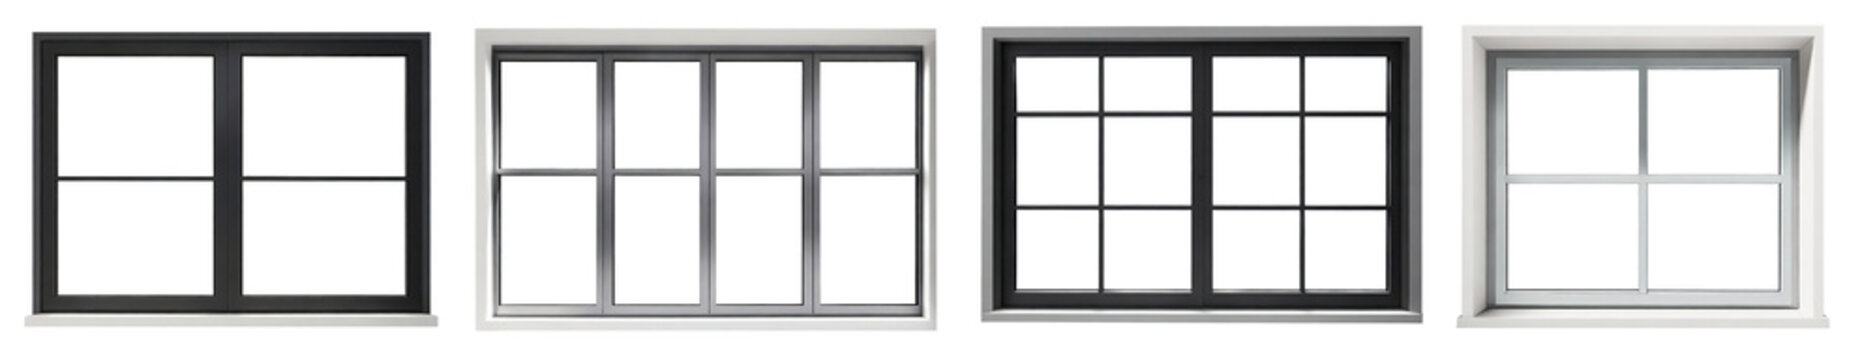 Fototapeta Real modern windows set isolated on a white background, various office frontstore frames collection for design, exterior building aluminum facade element.PNG file, clipping path .